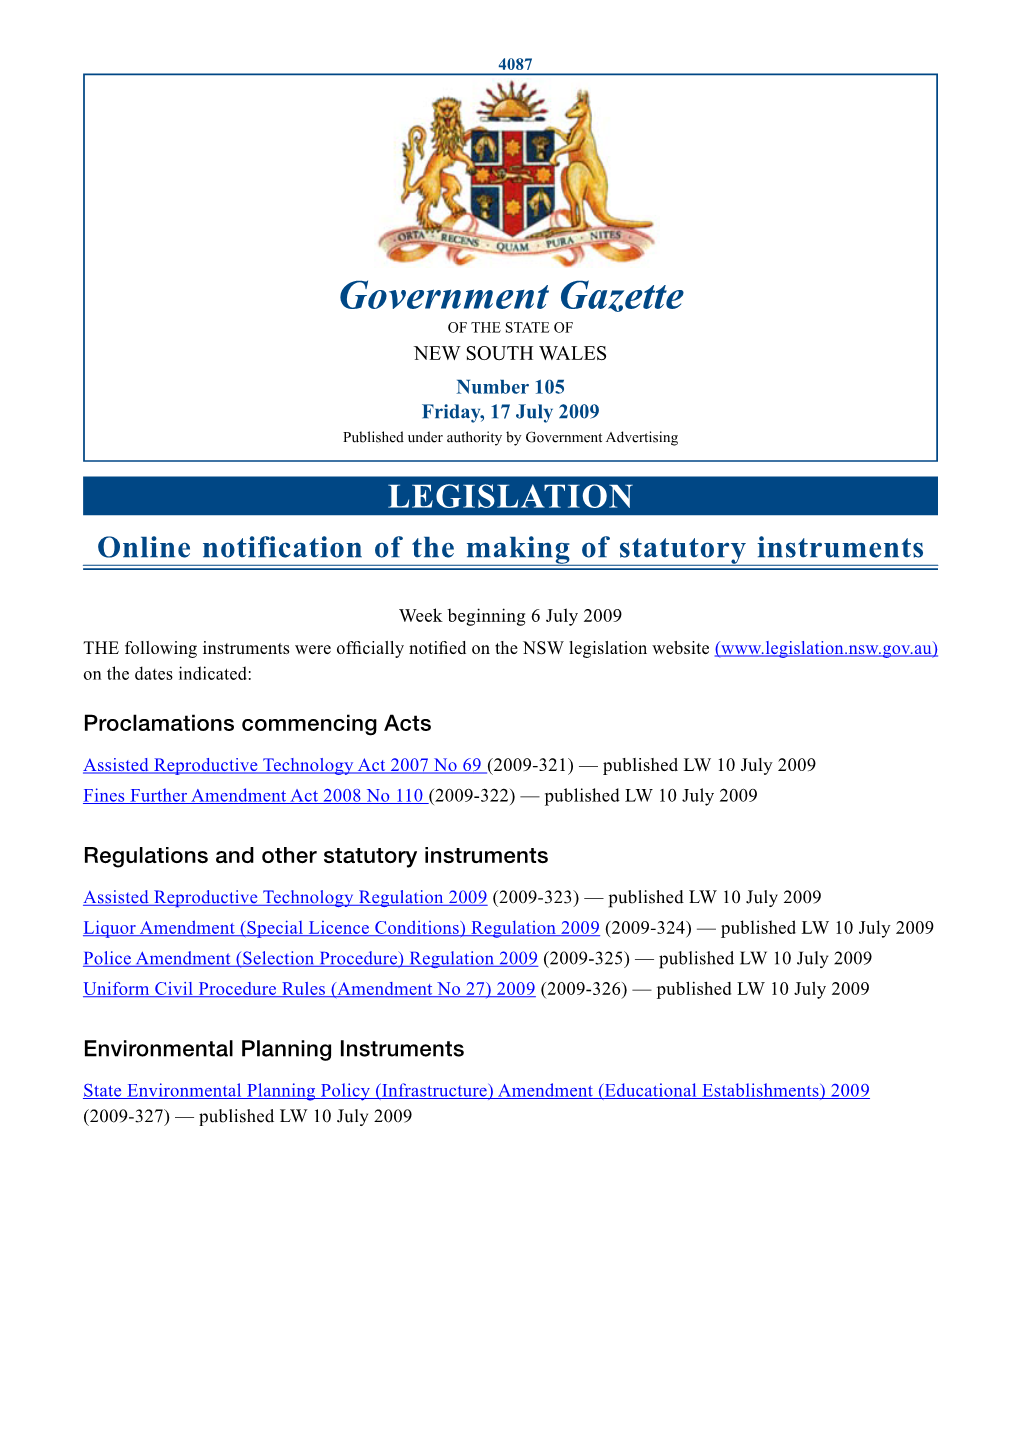 Government Gazette of the STATE of NEW SOUTH WALES Number 105 Friday, 17 July 2009 Published Under Authority by Government Advertising